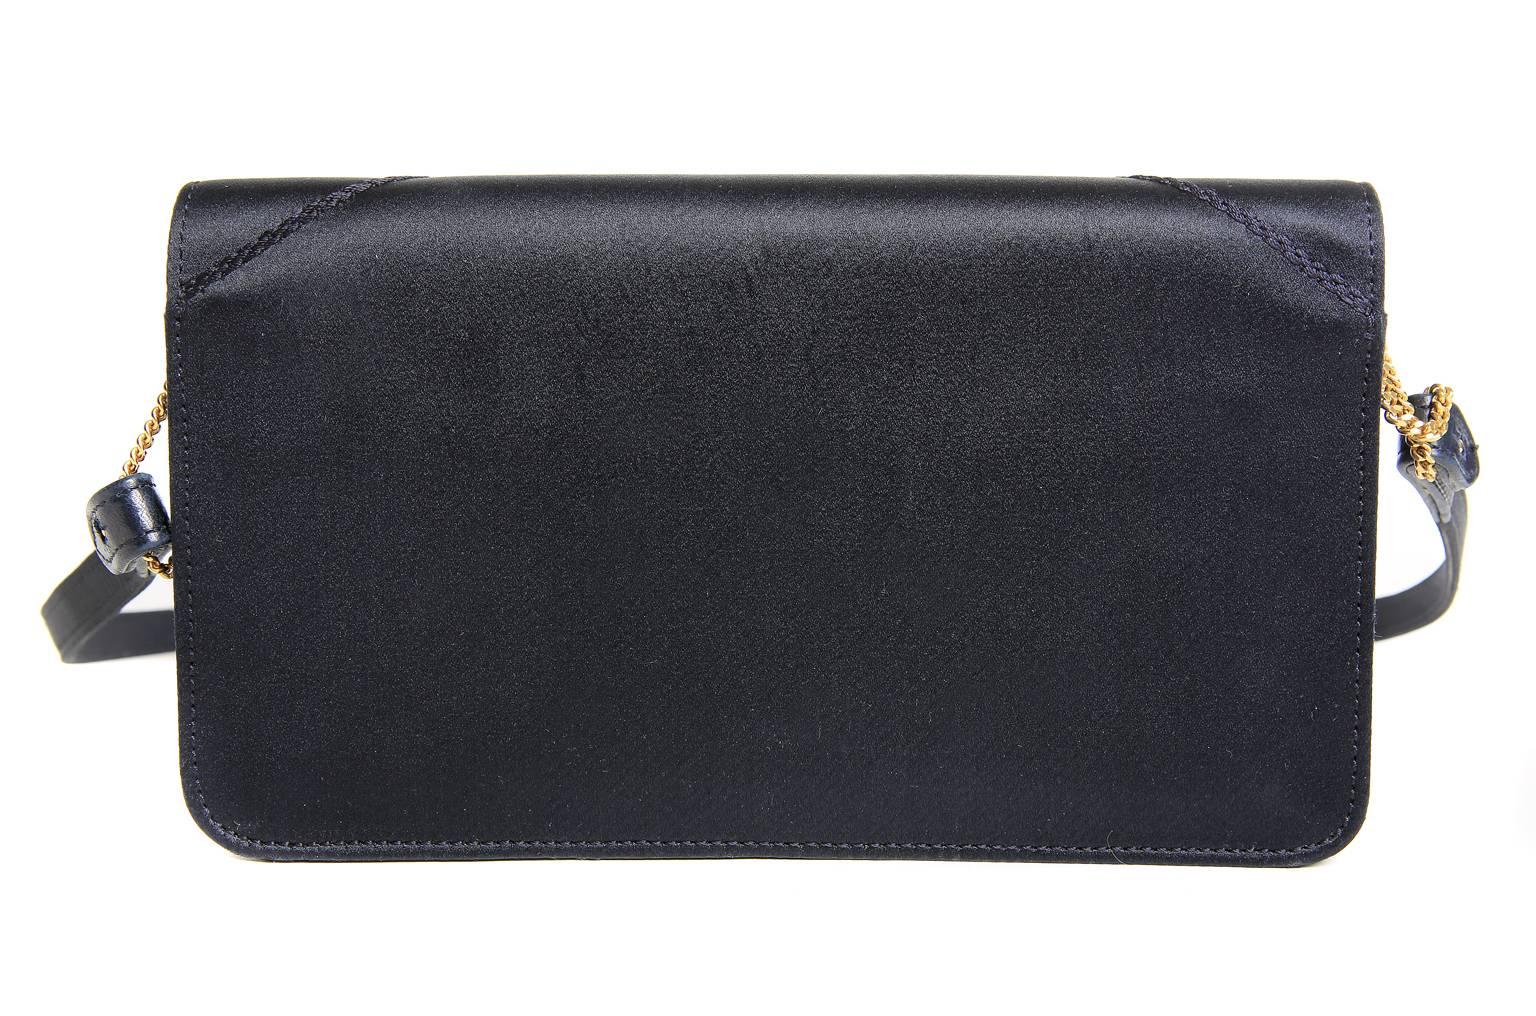  Hermès Navy Satin Evening Bag- pristine condition, possibly carried one time.  Beautifully designed, it can be carried as a clutch or with a shoulder strap that easily connects via dainty gold chains.  A beautiful bag on its own, it is also a must